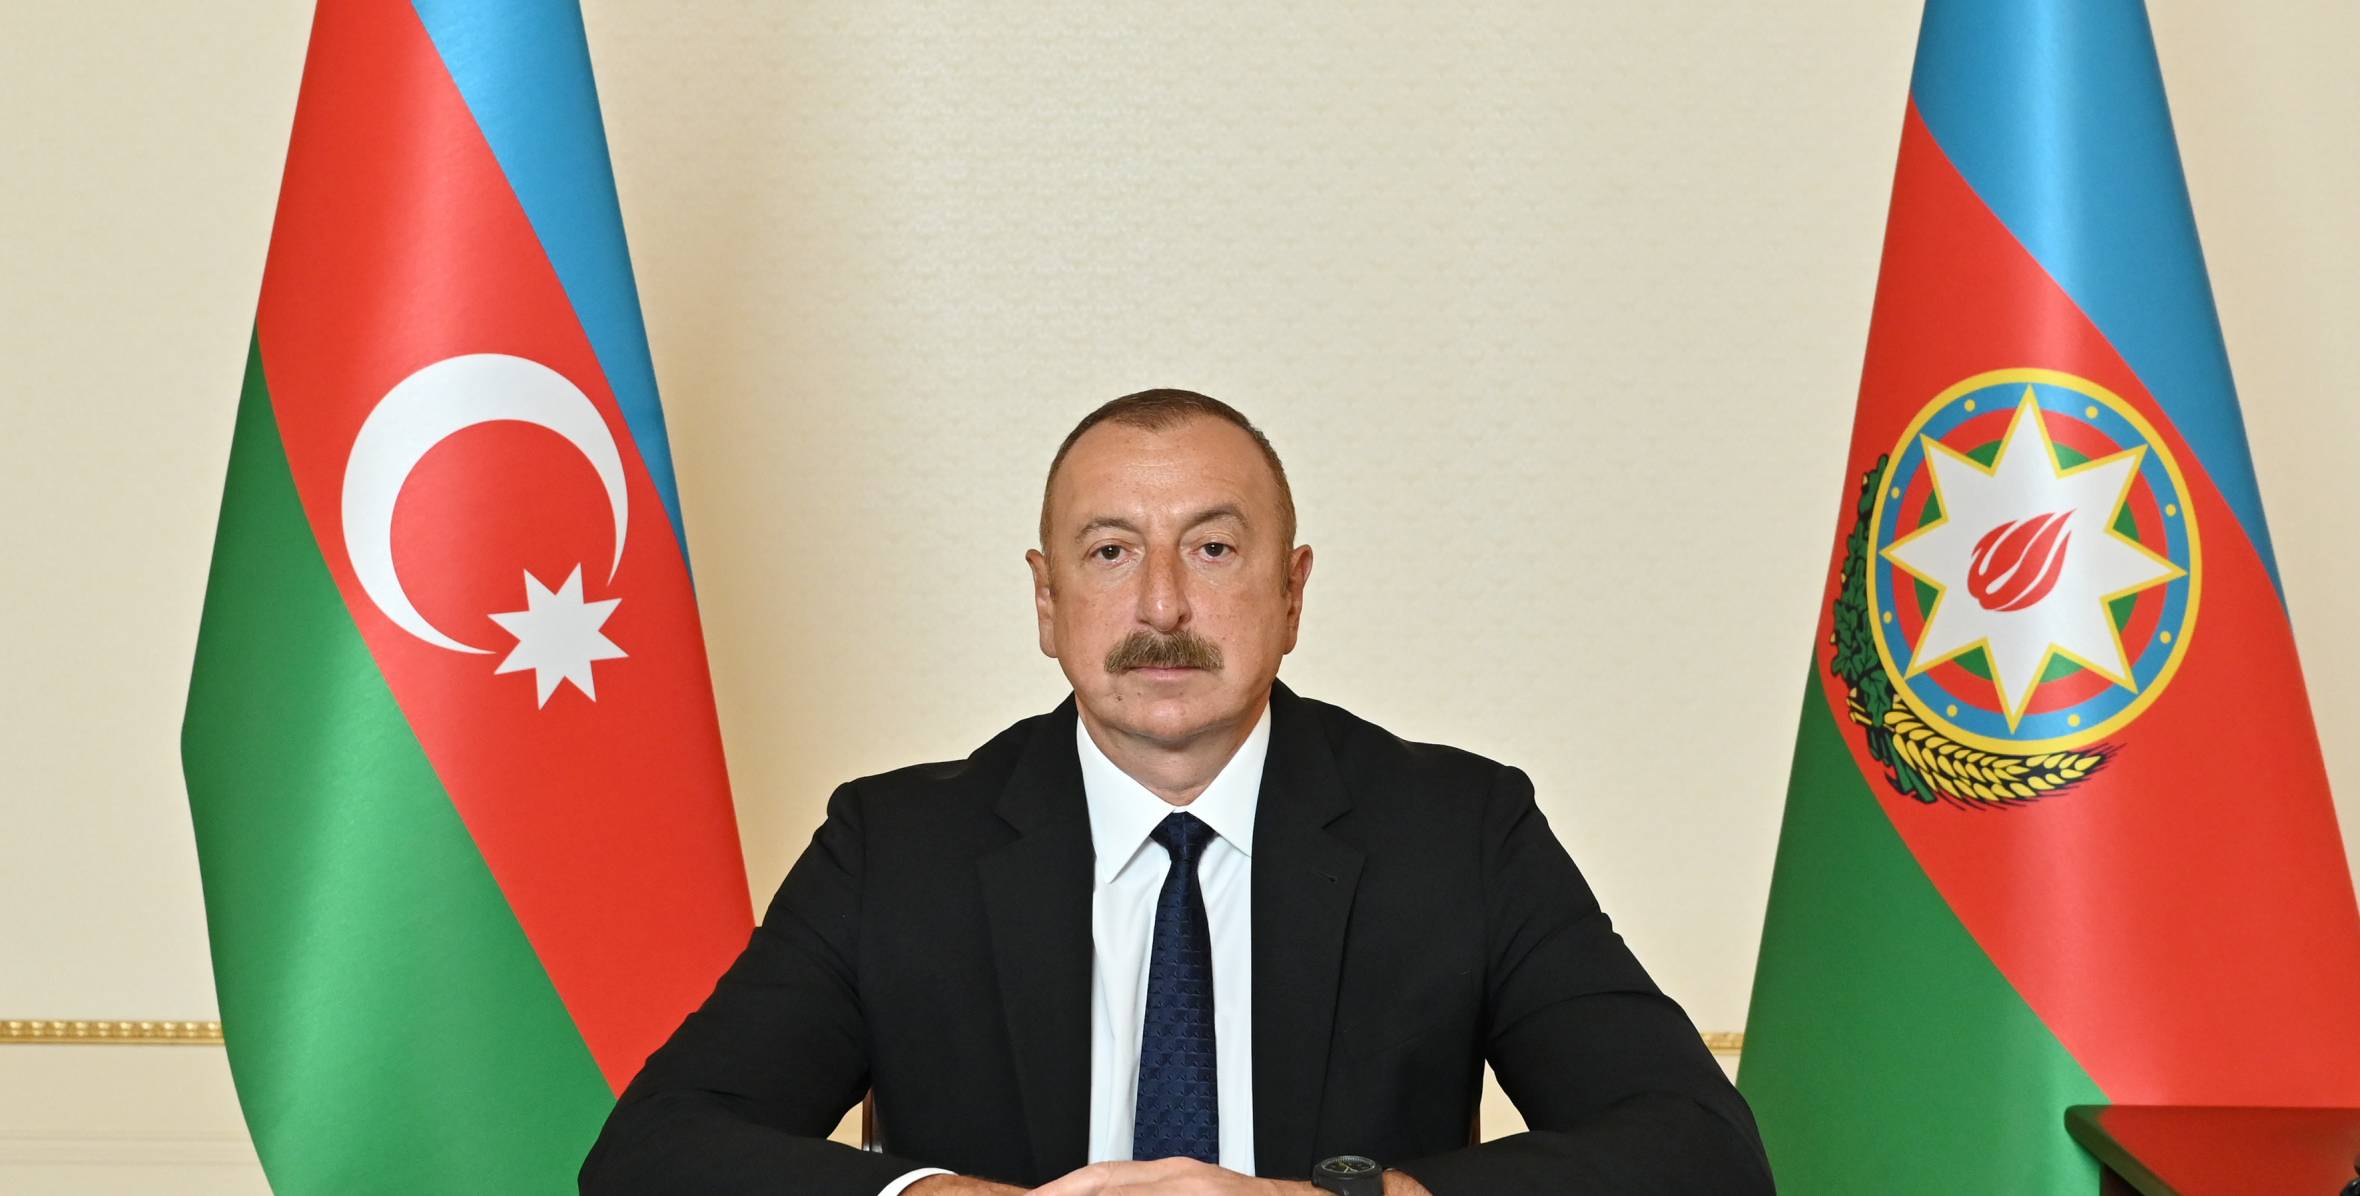 Ilham Aliyev made statement in video format at 11th session of World Urban Forum